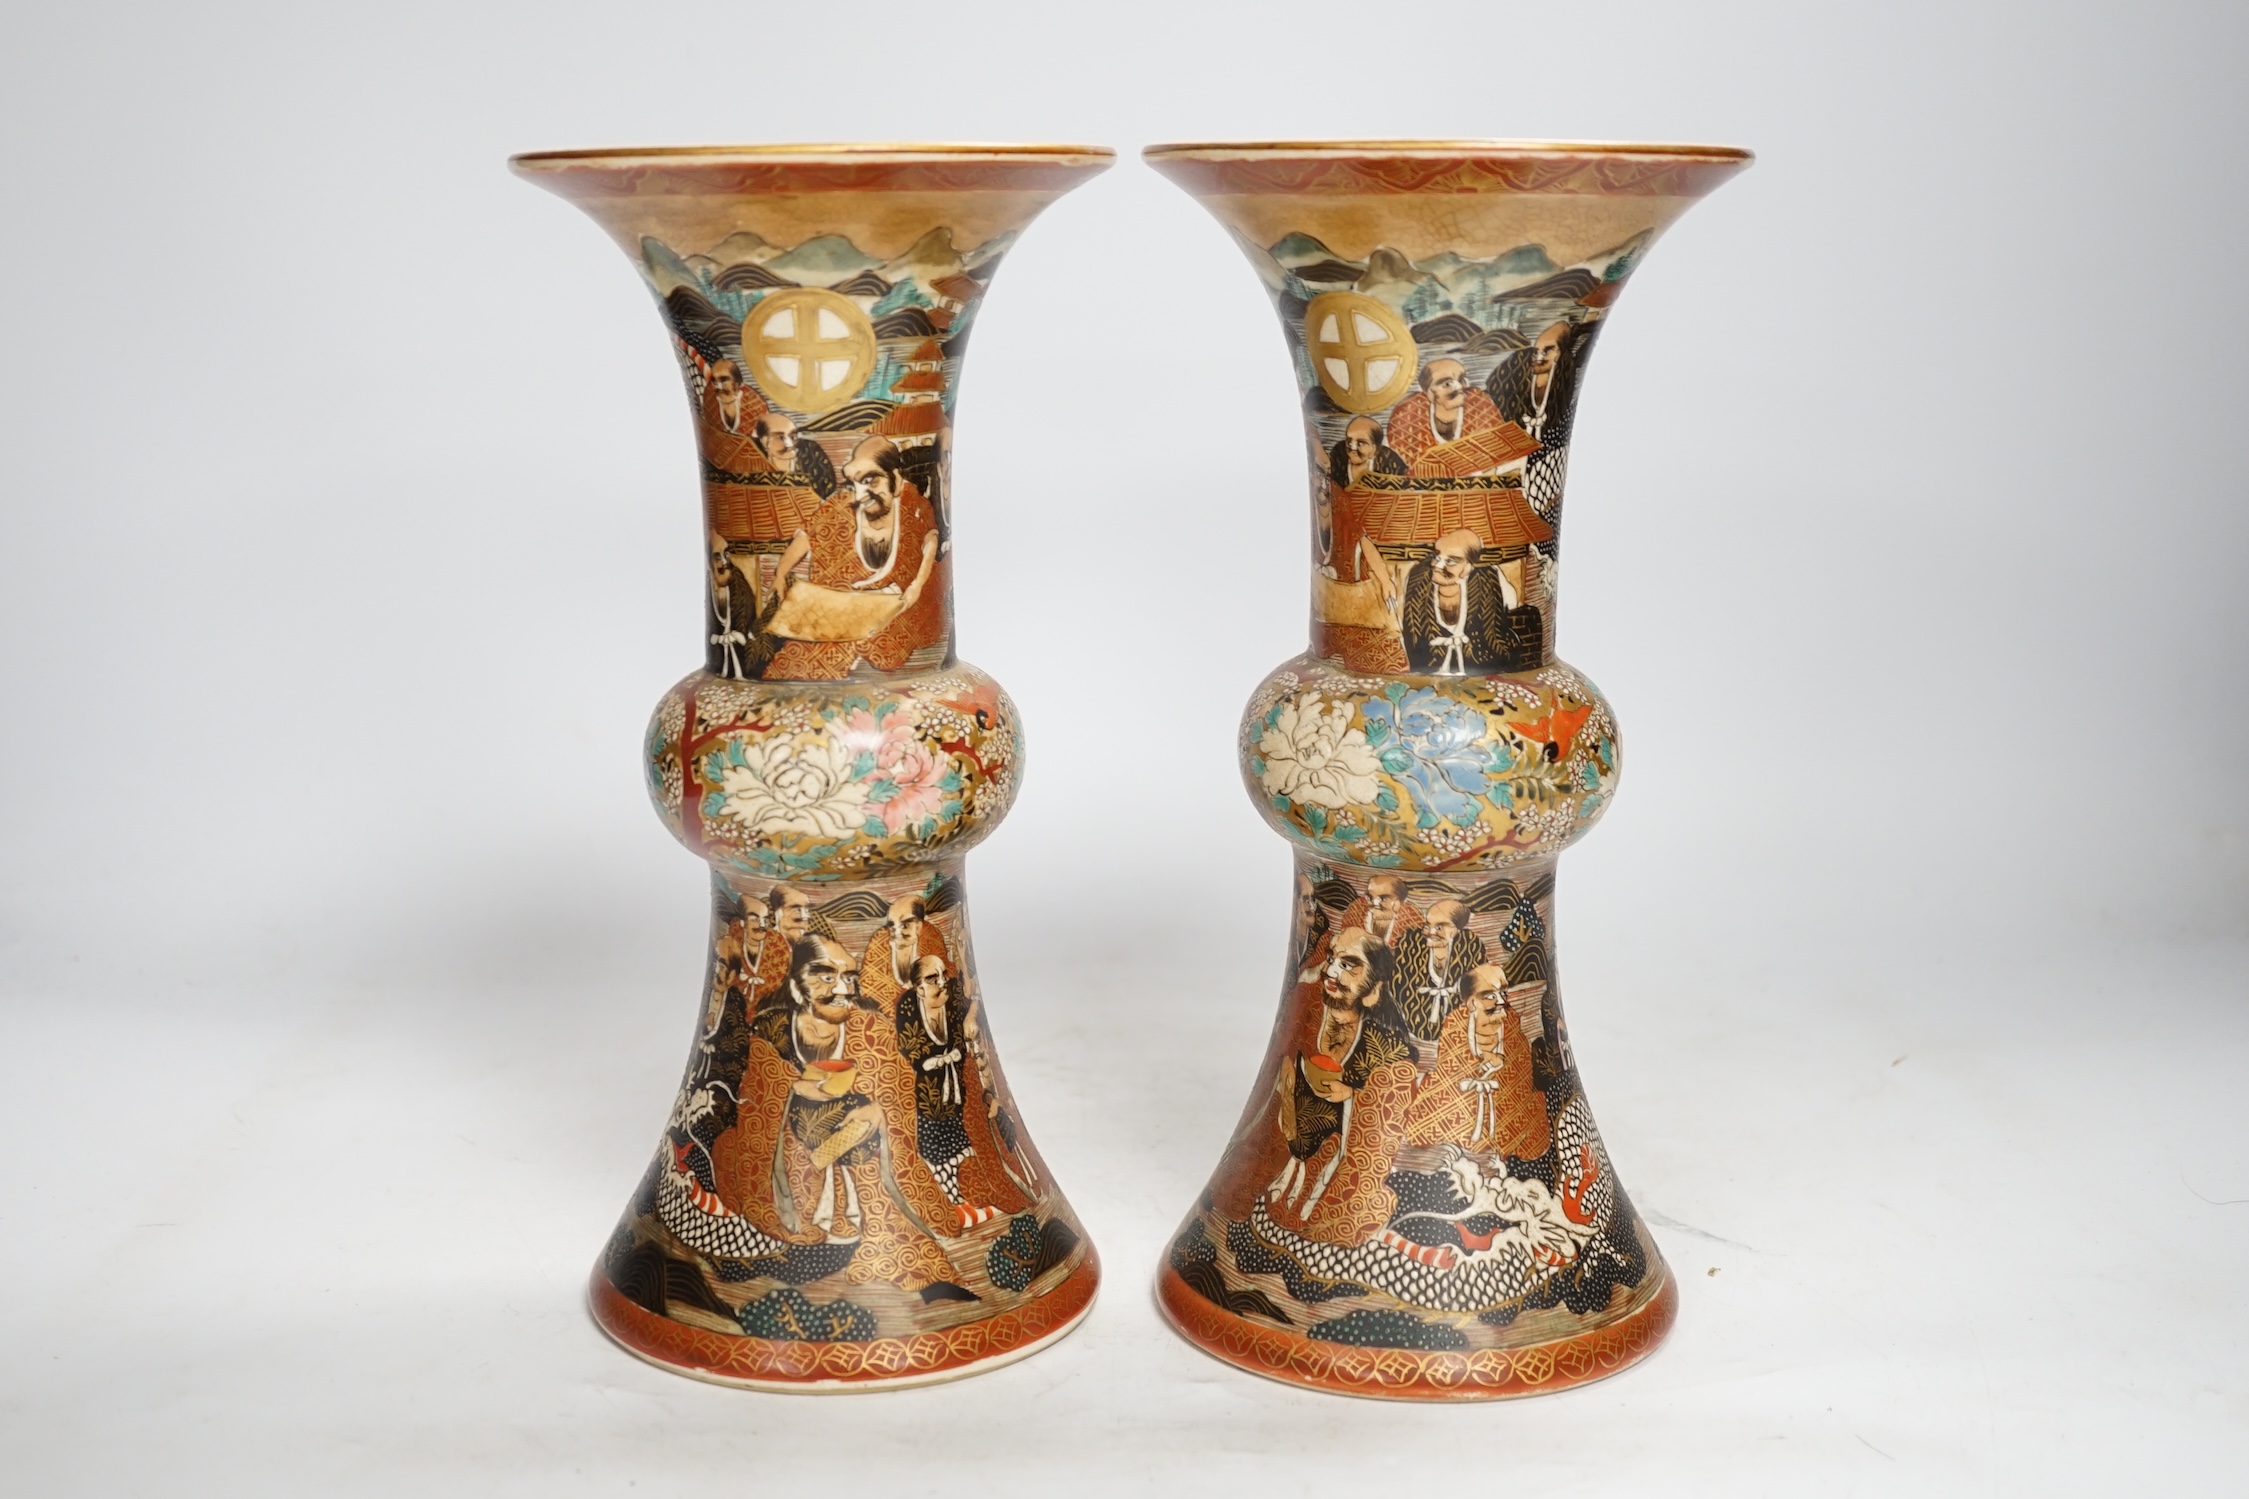 A pair of Japanese satsuma pottery 'rakan' vases, Meiji period, 24.5cm high (one a.f.). Condition - fair to good